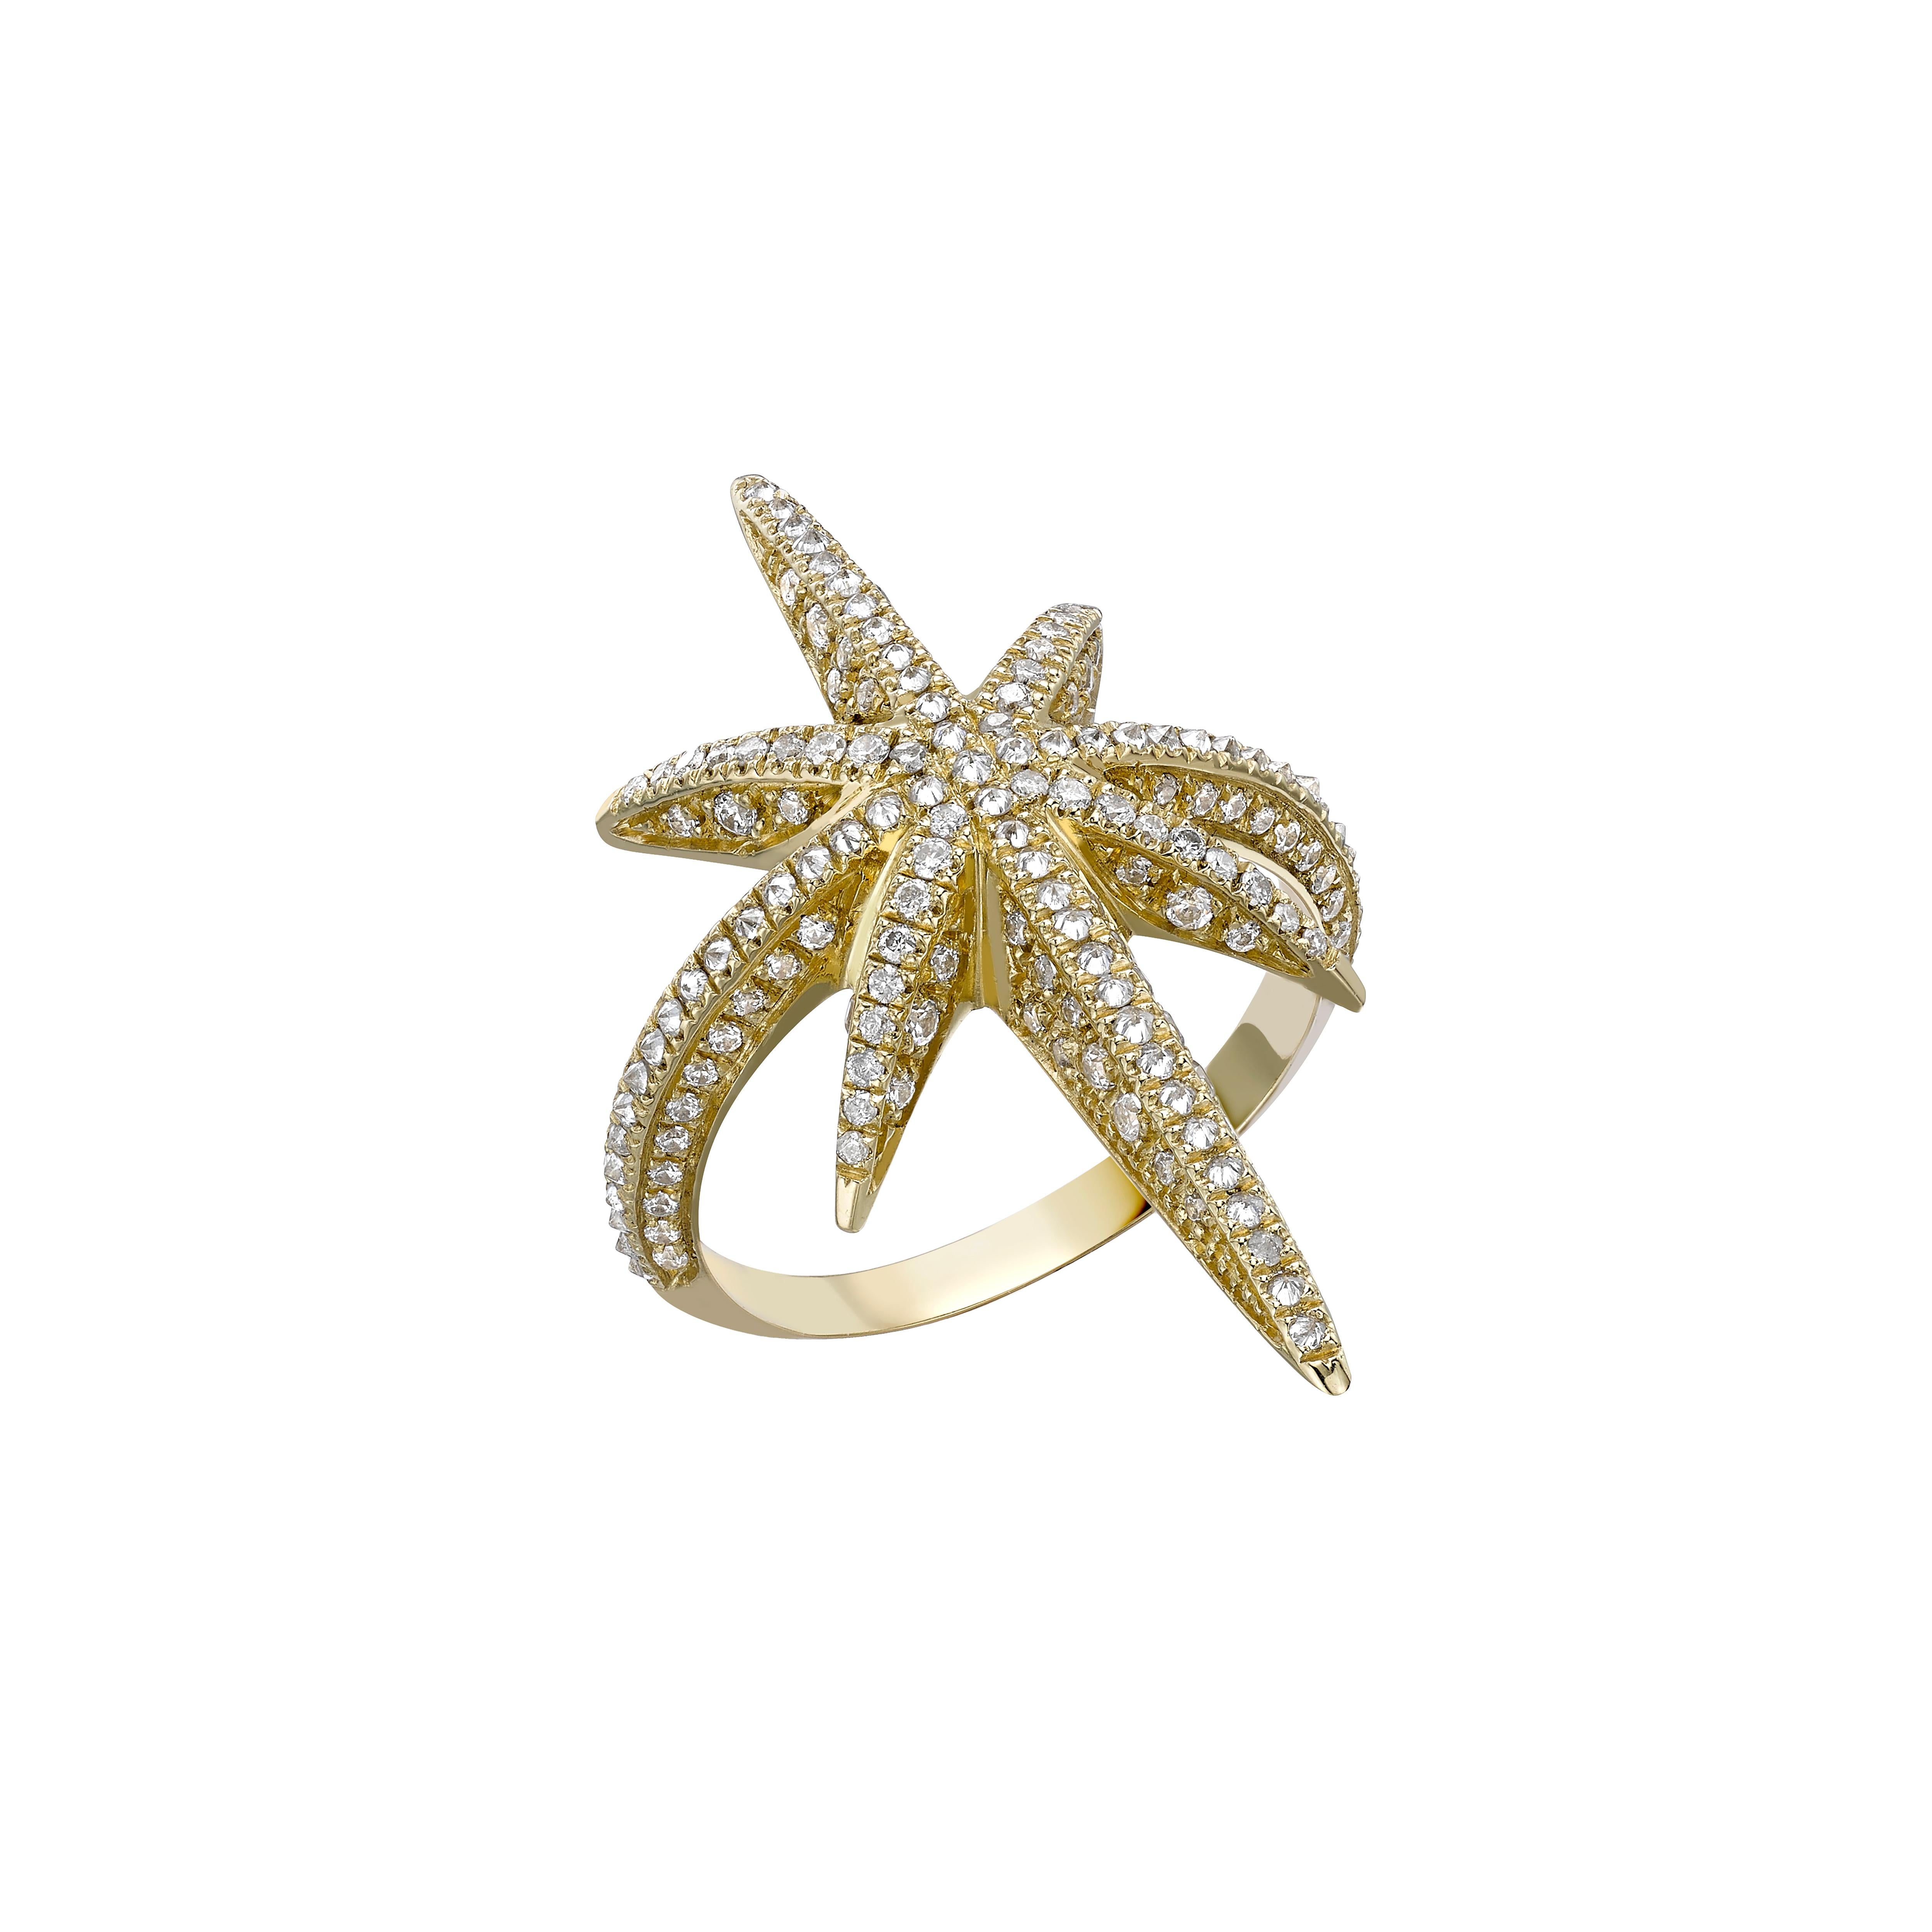 Contemporary Venyx 18 Karat Yellow Gold Diamond and White Sapphire Star Cocktail Ring For Sale